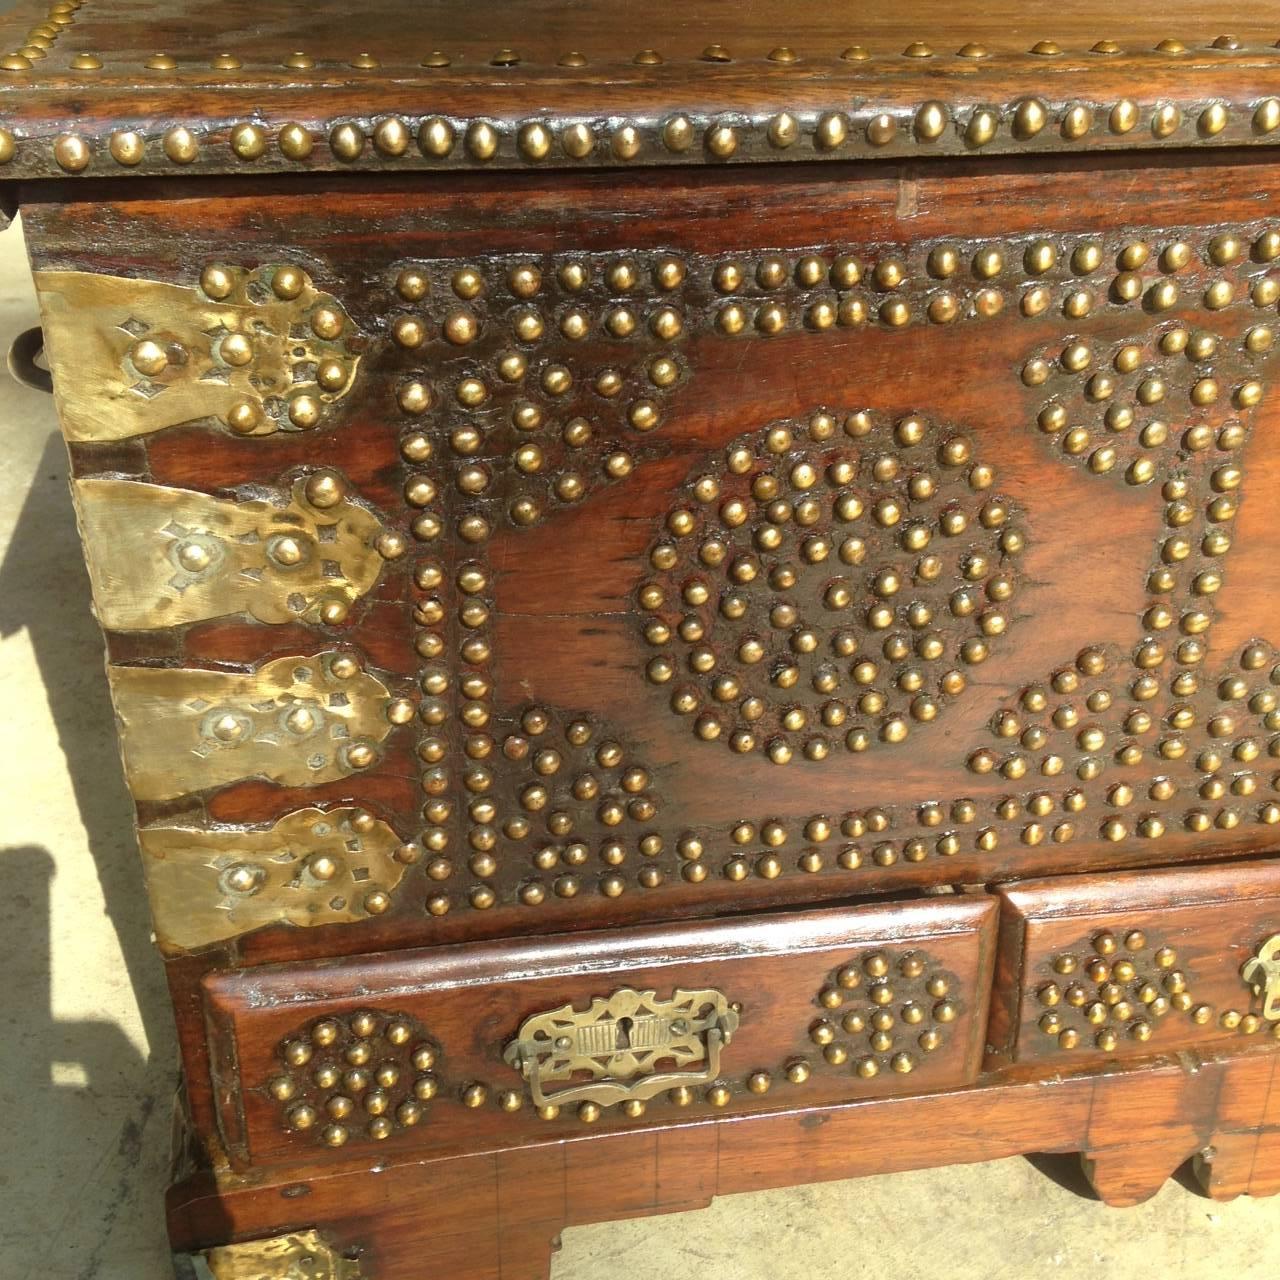 Anglo-Indian dowry chest, circa 1850, made of a heavy walnut-like wood and dovetailed construction, the overhanging hinged top with brass tack trim opening to a well, the till on the left hiding a secret compartment; the front with three drawers.